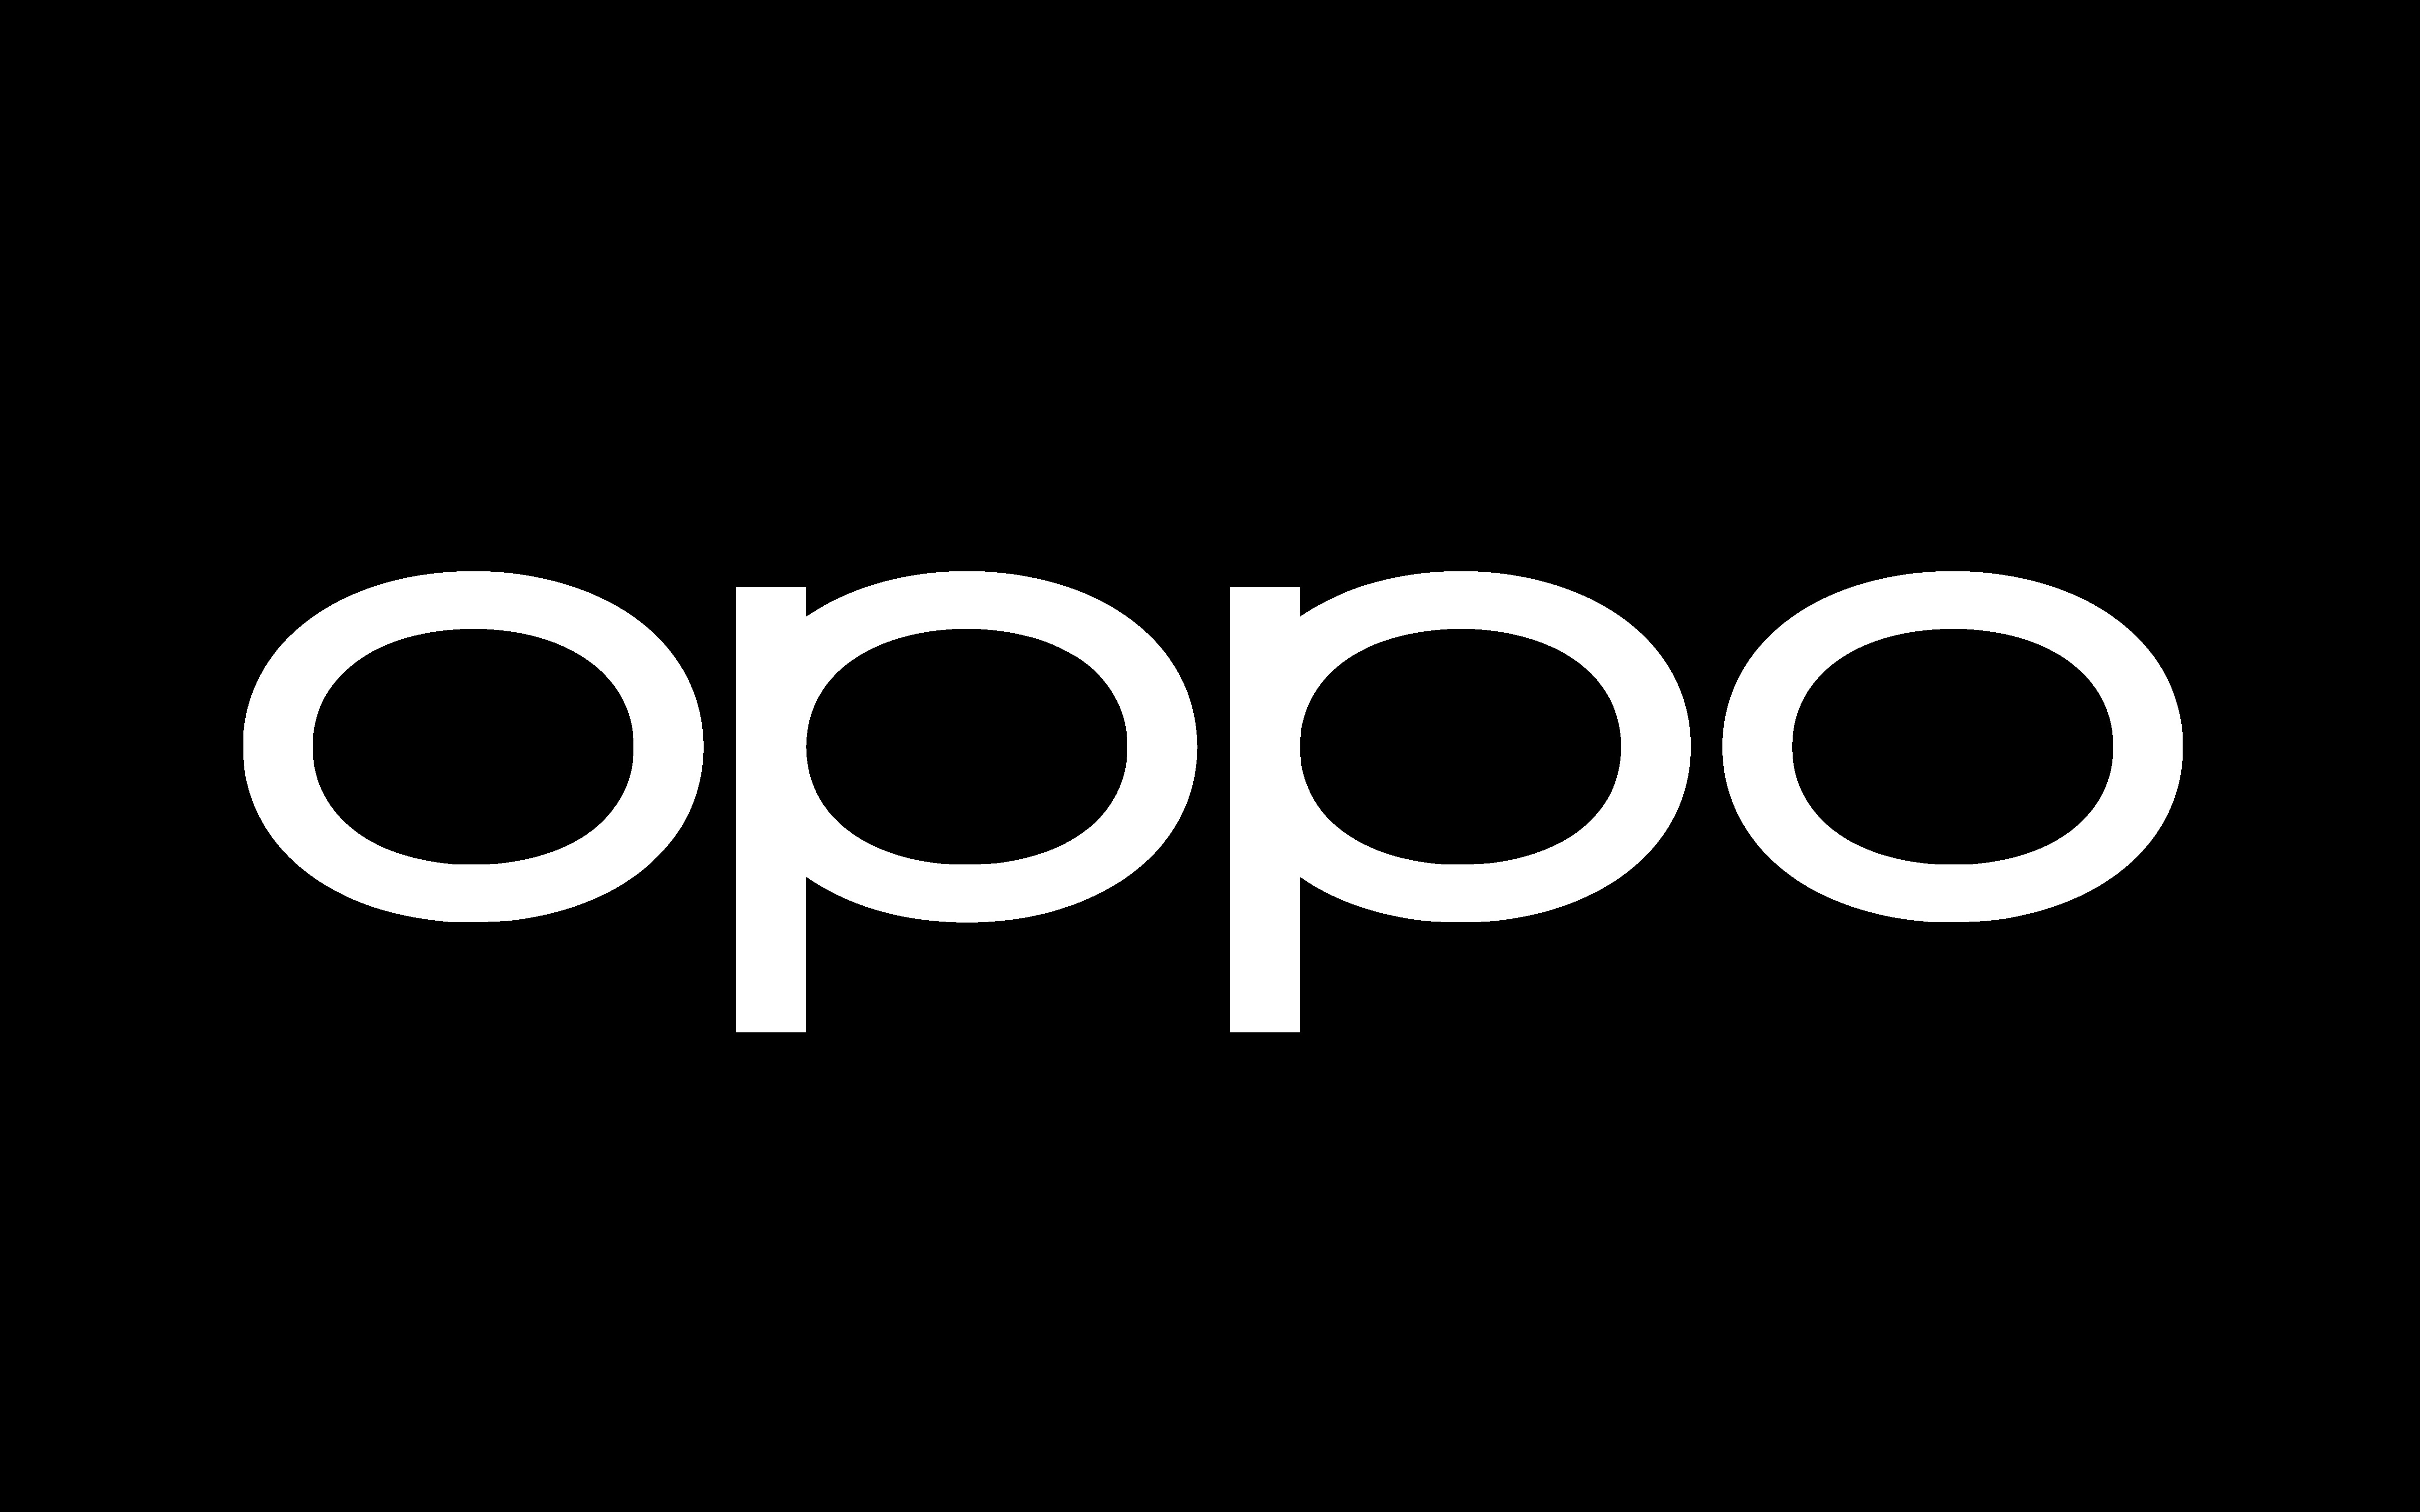 Oppo moves away from green in latest logo color redesign